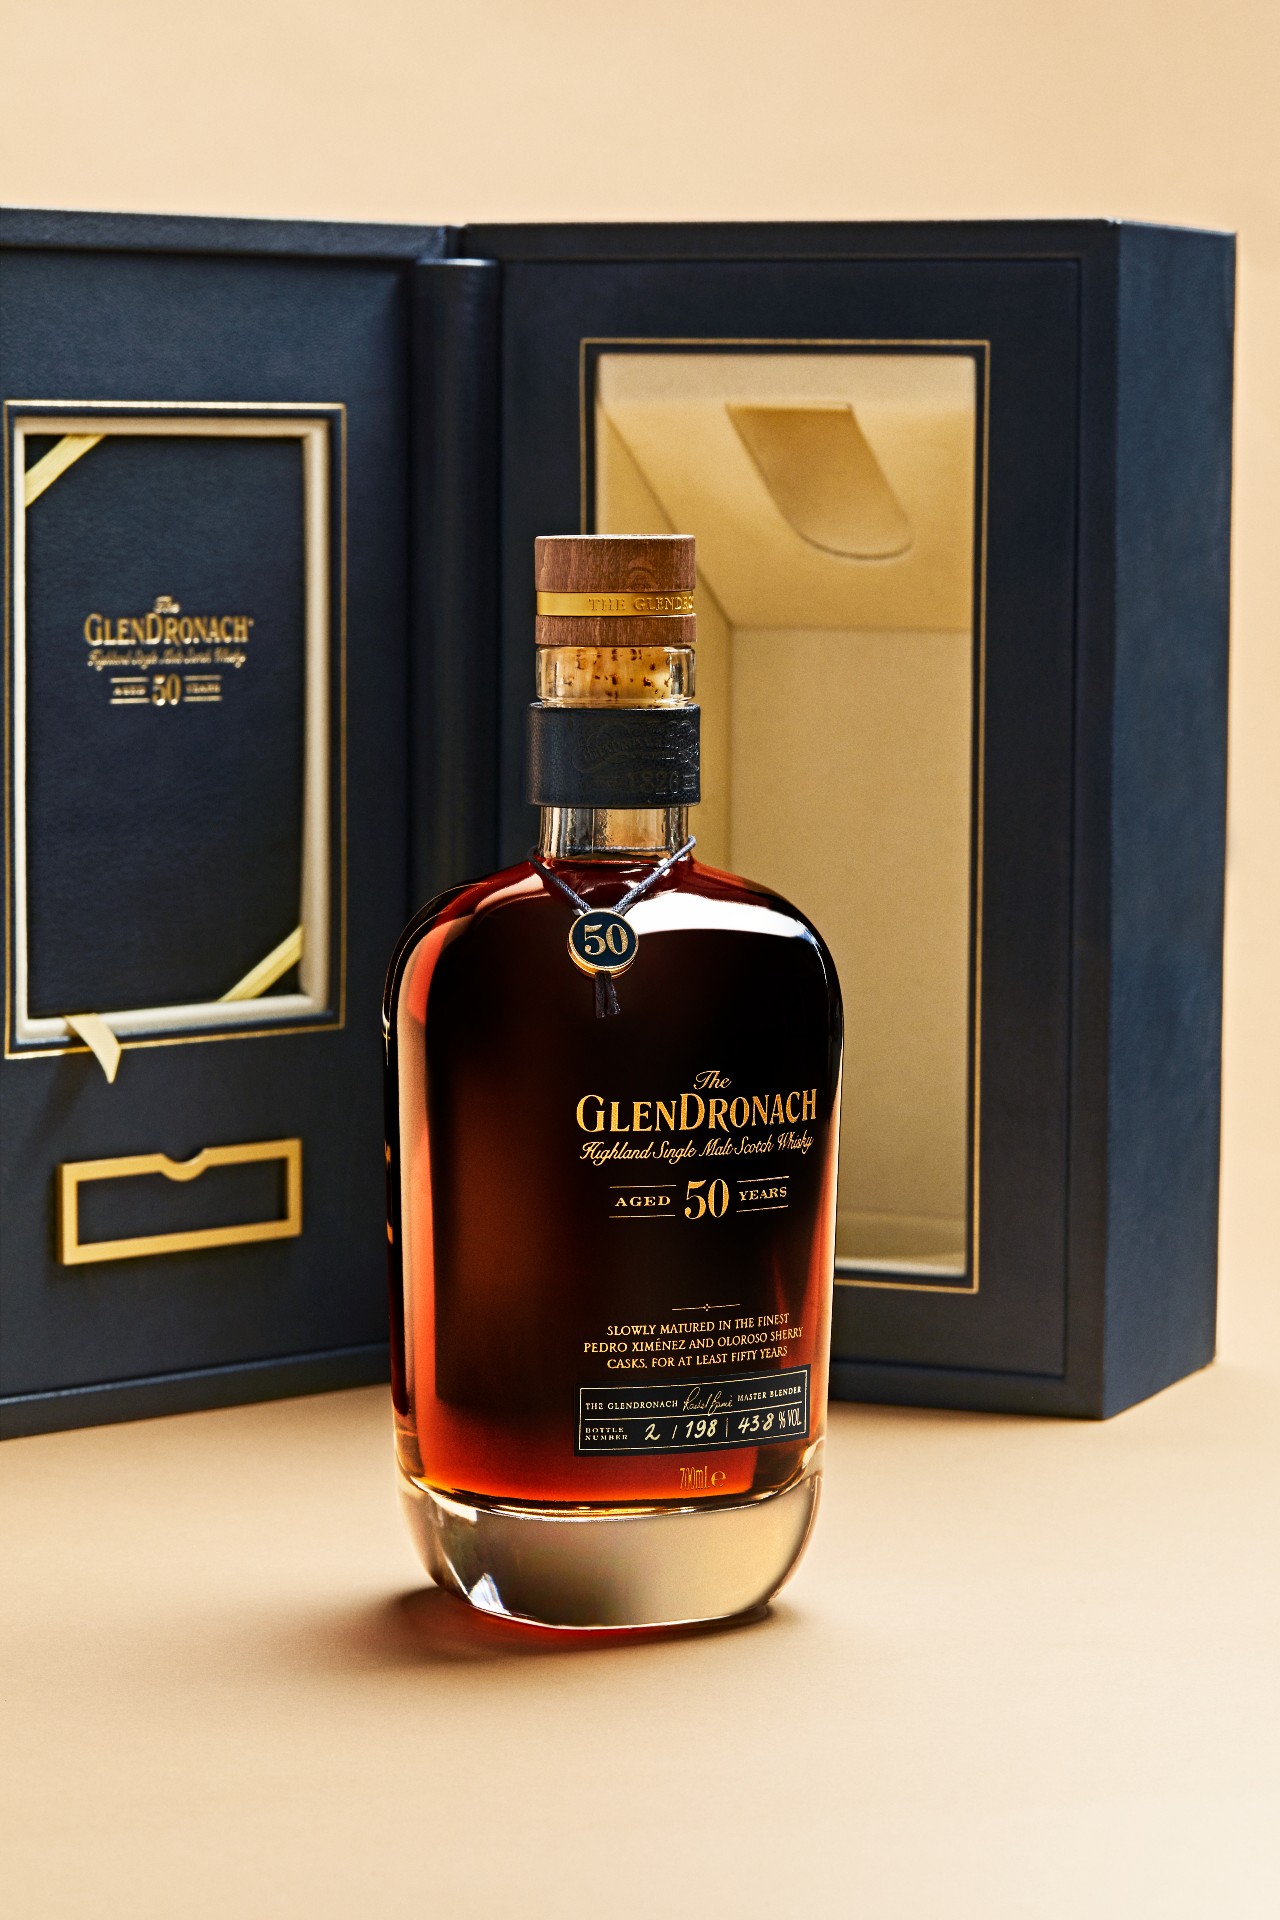 The GlenDronach 50 Years Old